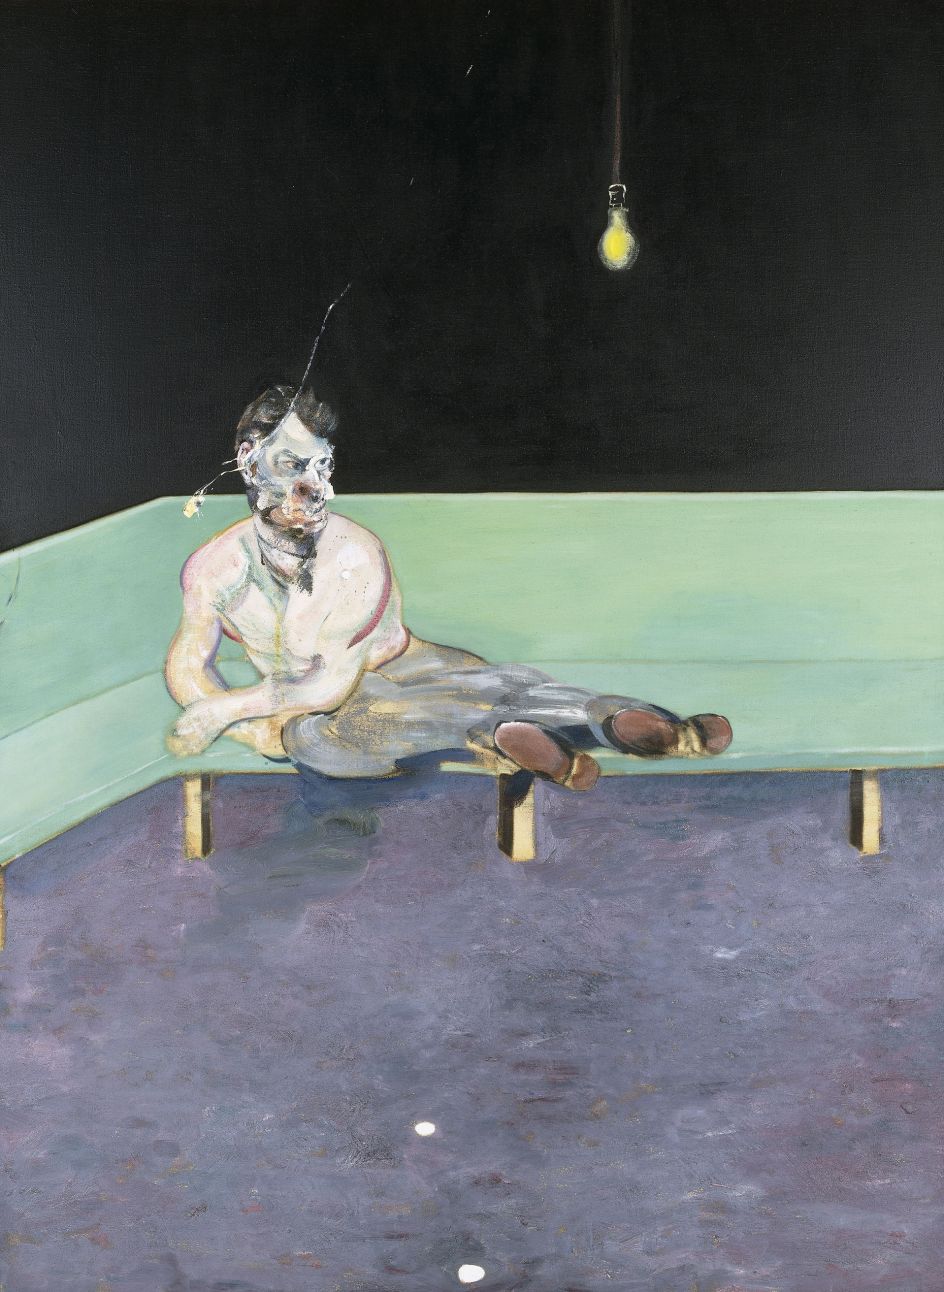 Francis Bacon (1909-1992) Study for Portrait of Lucian Freud 1964 Oil paint on canvas, 1980 x 1476 mm The Lewis Collection © The Estate of Francis Bacon. All rights reserved. DACS, London. Photo: Prudence Cuming Associates Ltd.